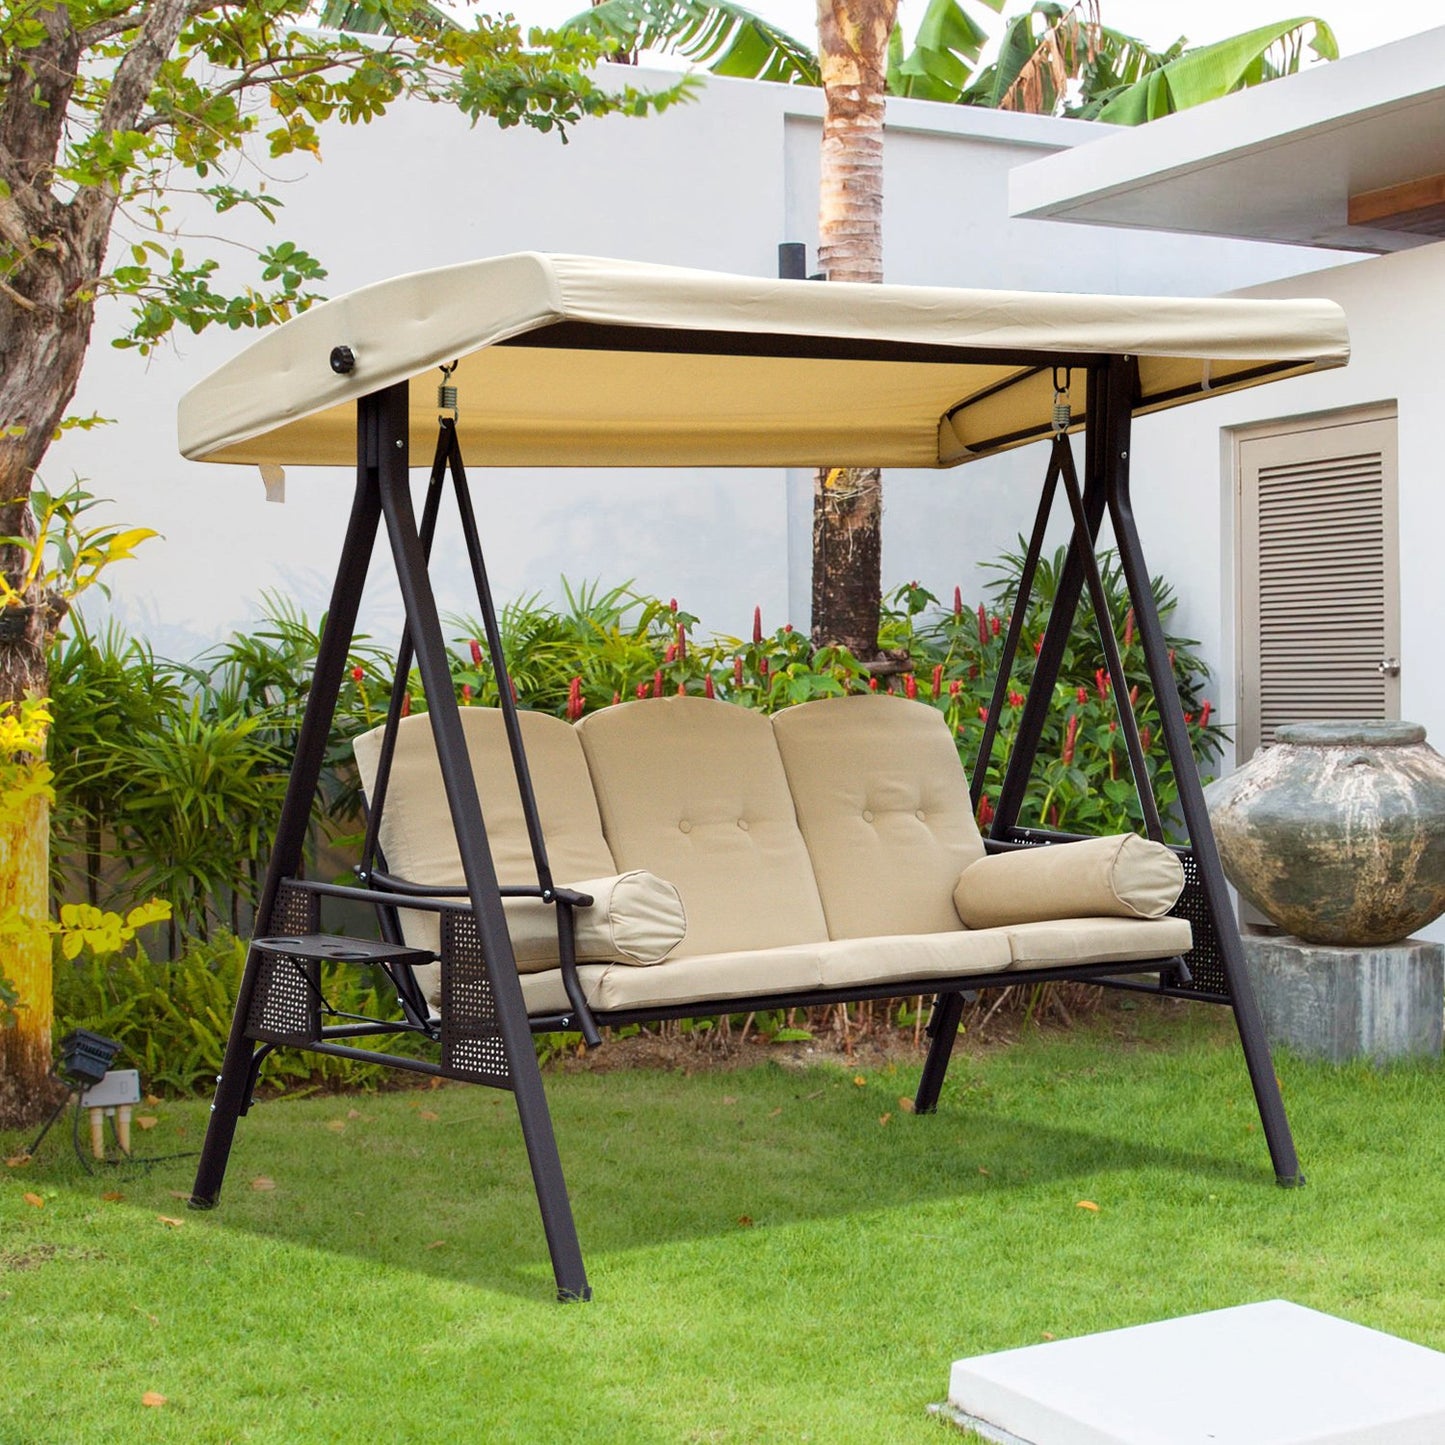 Outsunny Swing Chair Hammock Chair 3 Seater Canopy Cushion Shelter Outdoor Bench Steel Beige